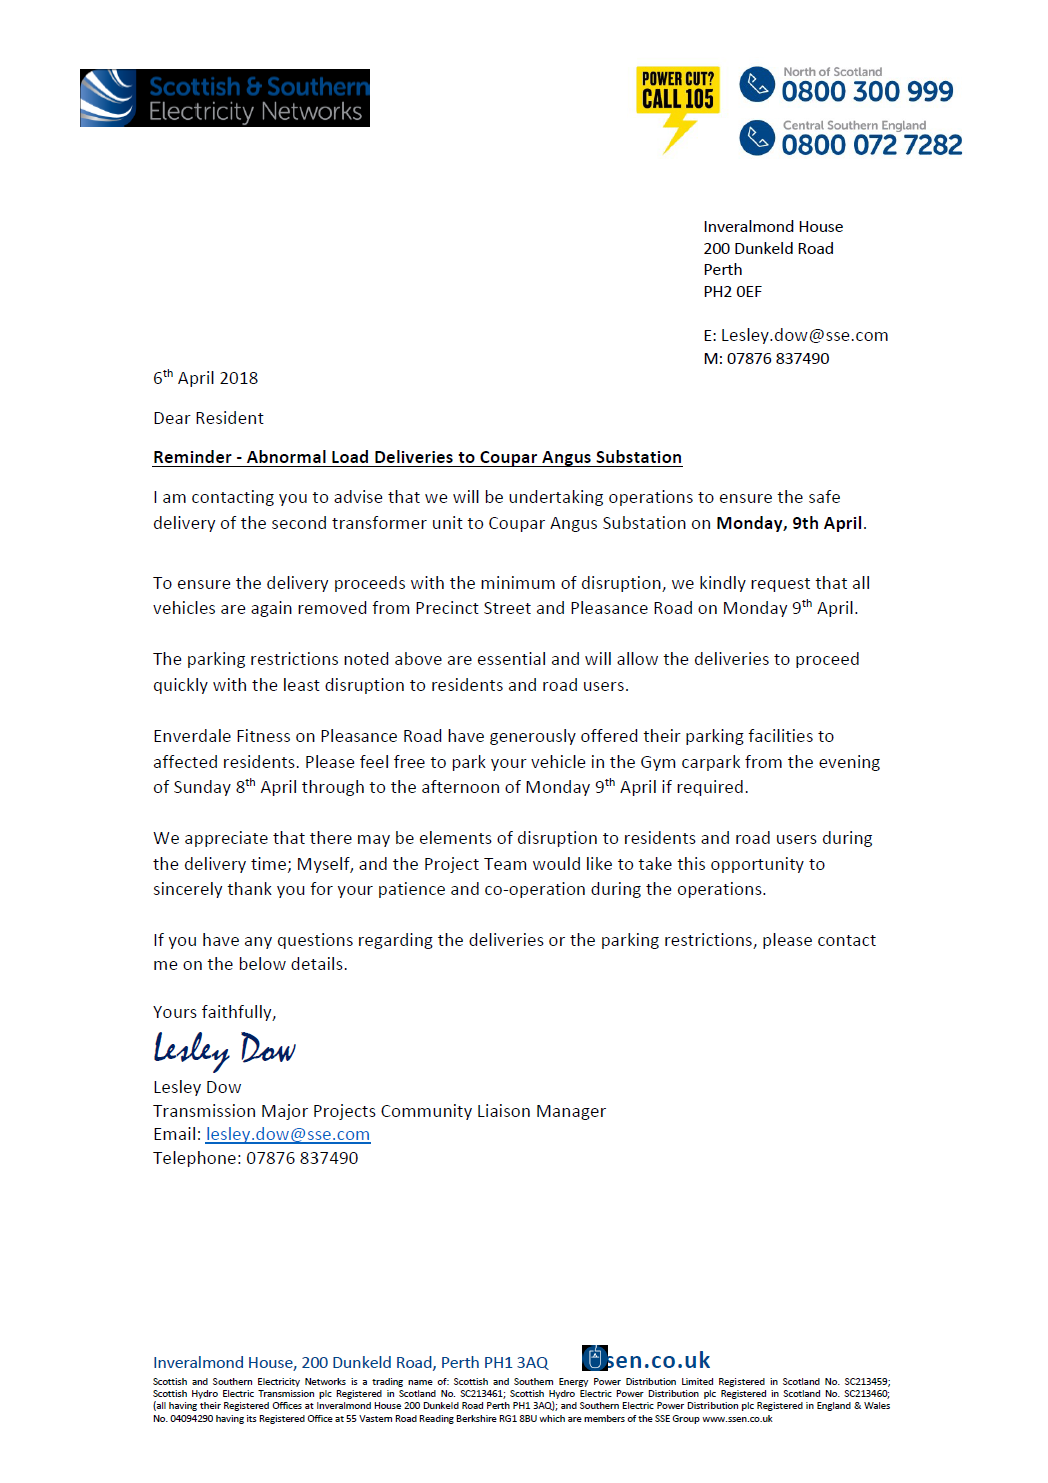 picture of letter from Scottish and Southern, asking residents of Precinct Street and Pleasance Road to move their cars to allow easy passage of a second transformer on Monday 9th April 2018.